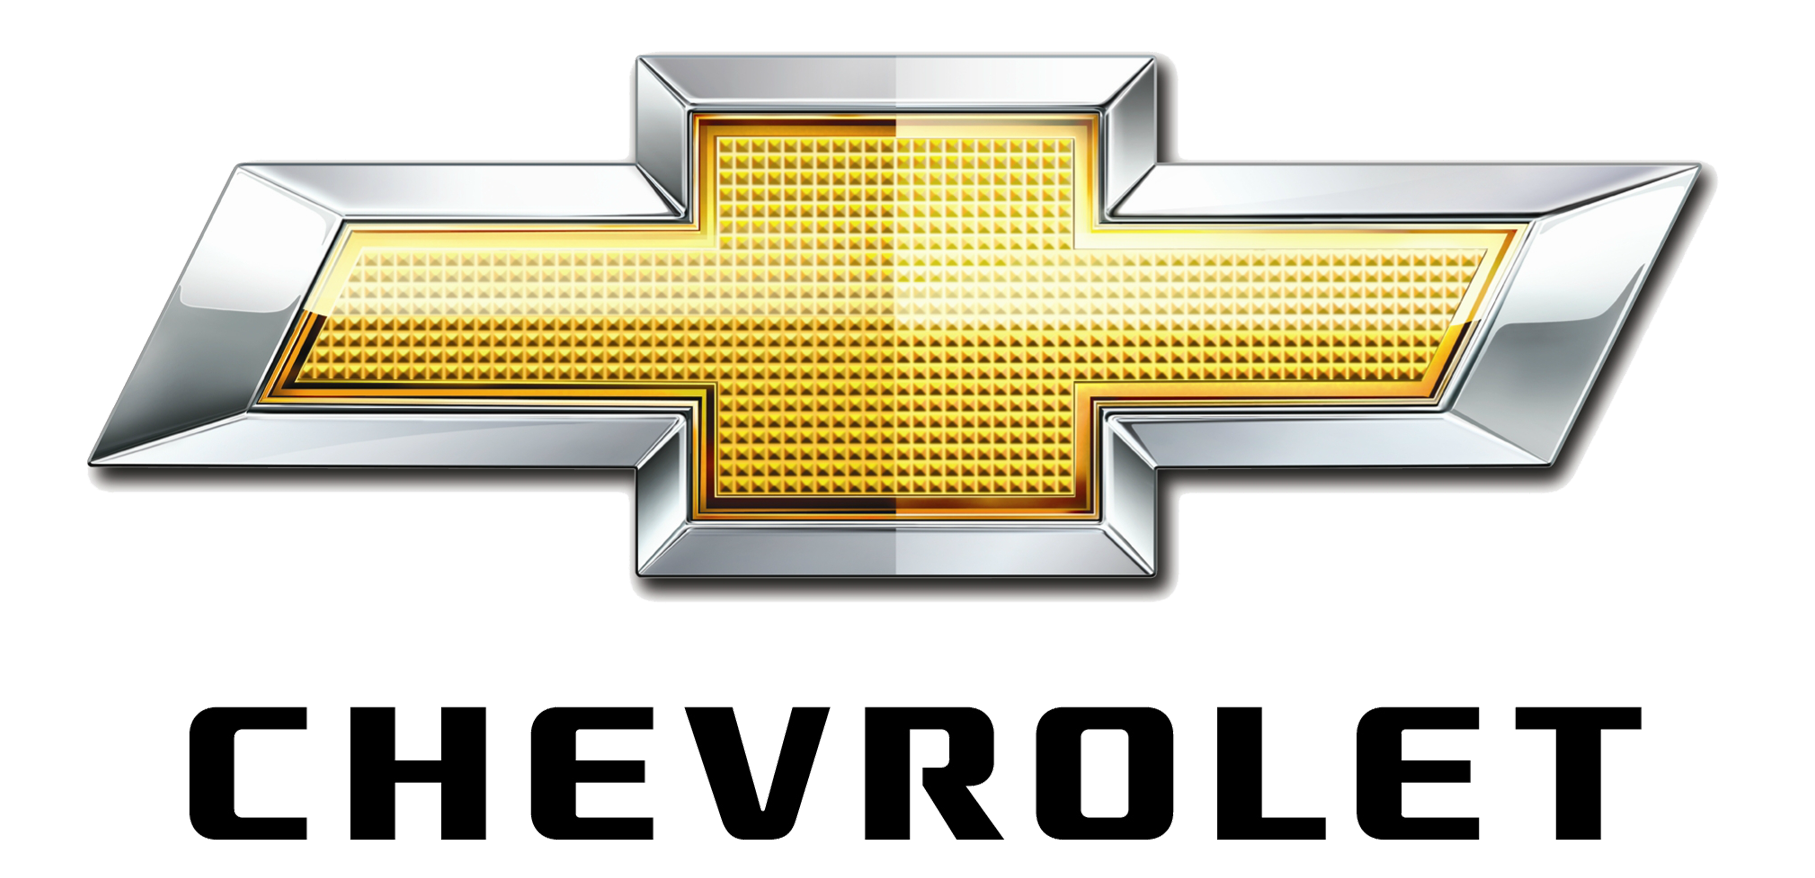 Chevrolet High Resolution Logo Download Png Hdpng.com  - Chevrolet, Transparent background PNG HD thumbnail